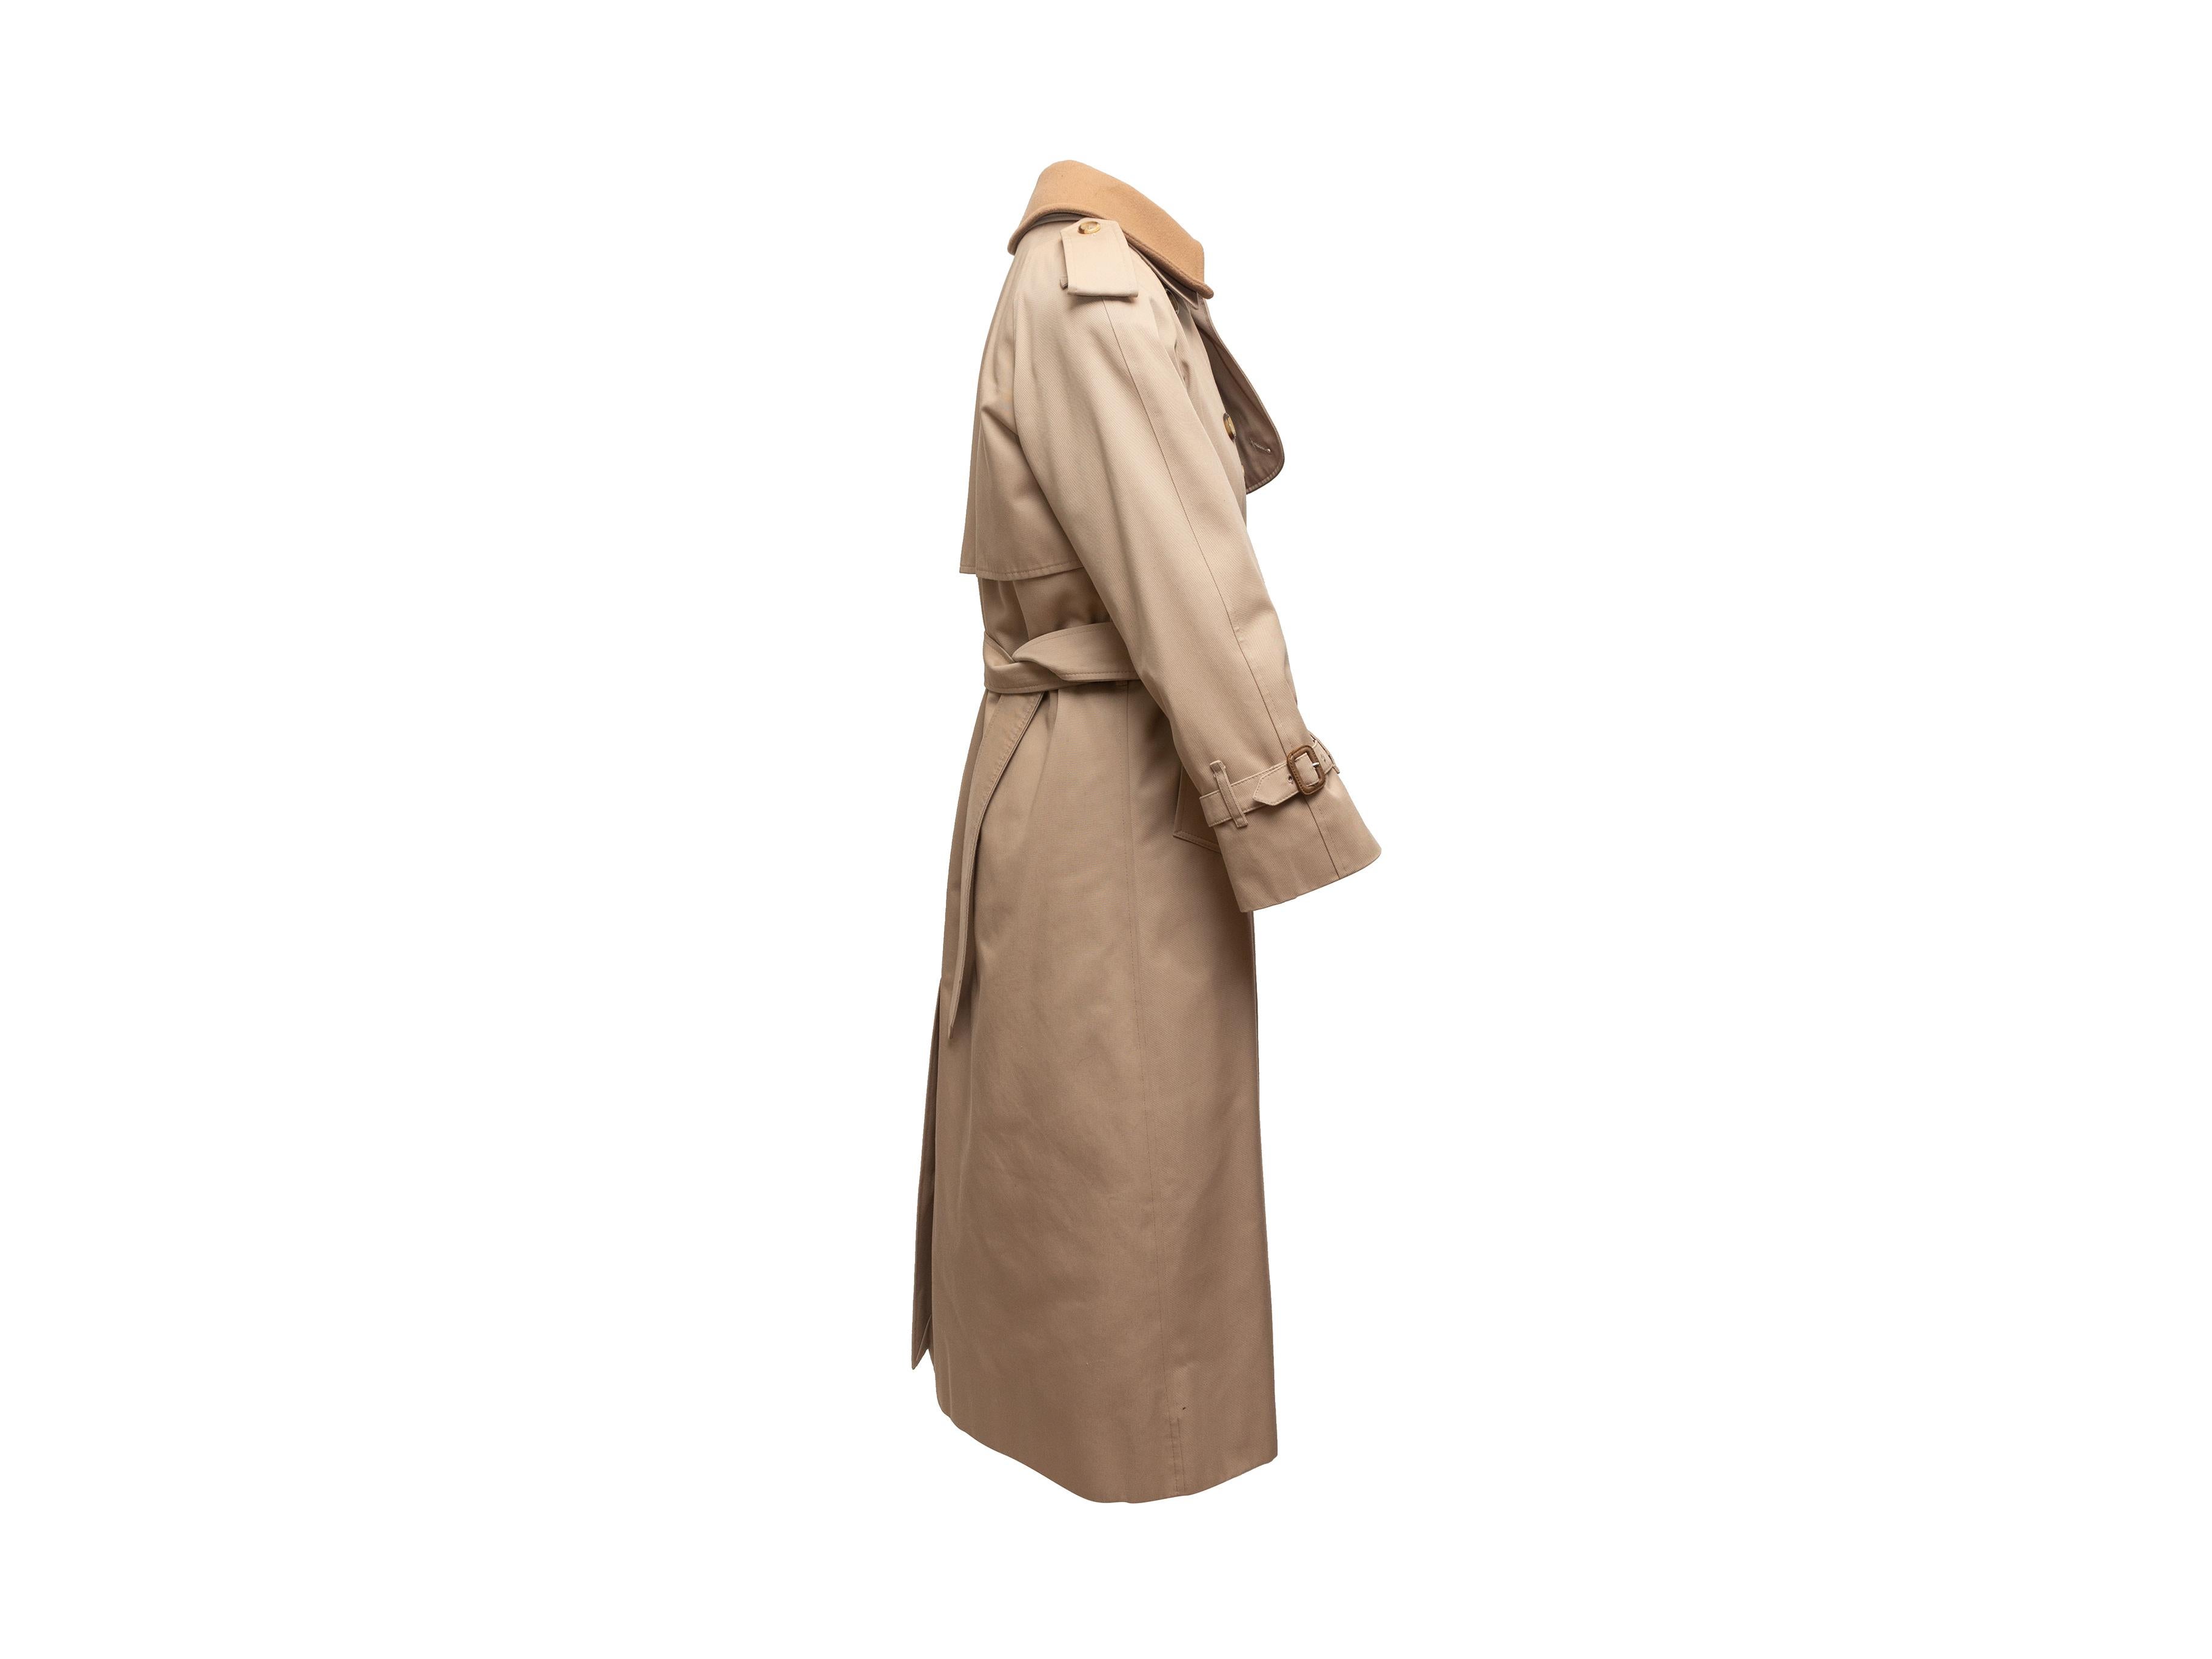 Product details: Tan long double-breasted trench coat by Burberry London. Pointed collar. Dual hip pockets. Belt at waist. Tan wool lining. Button closures at front. 36